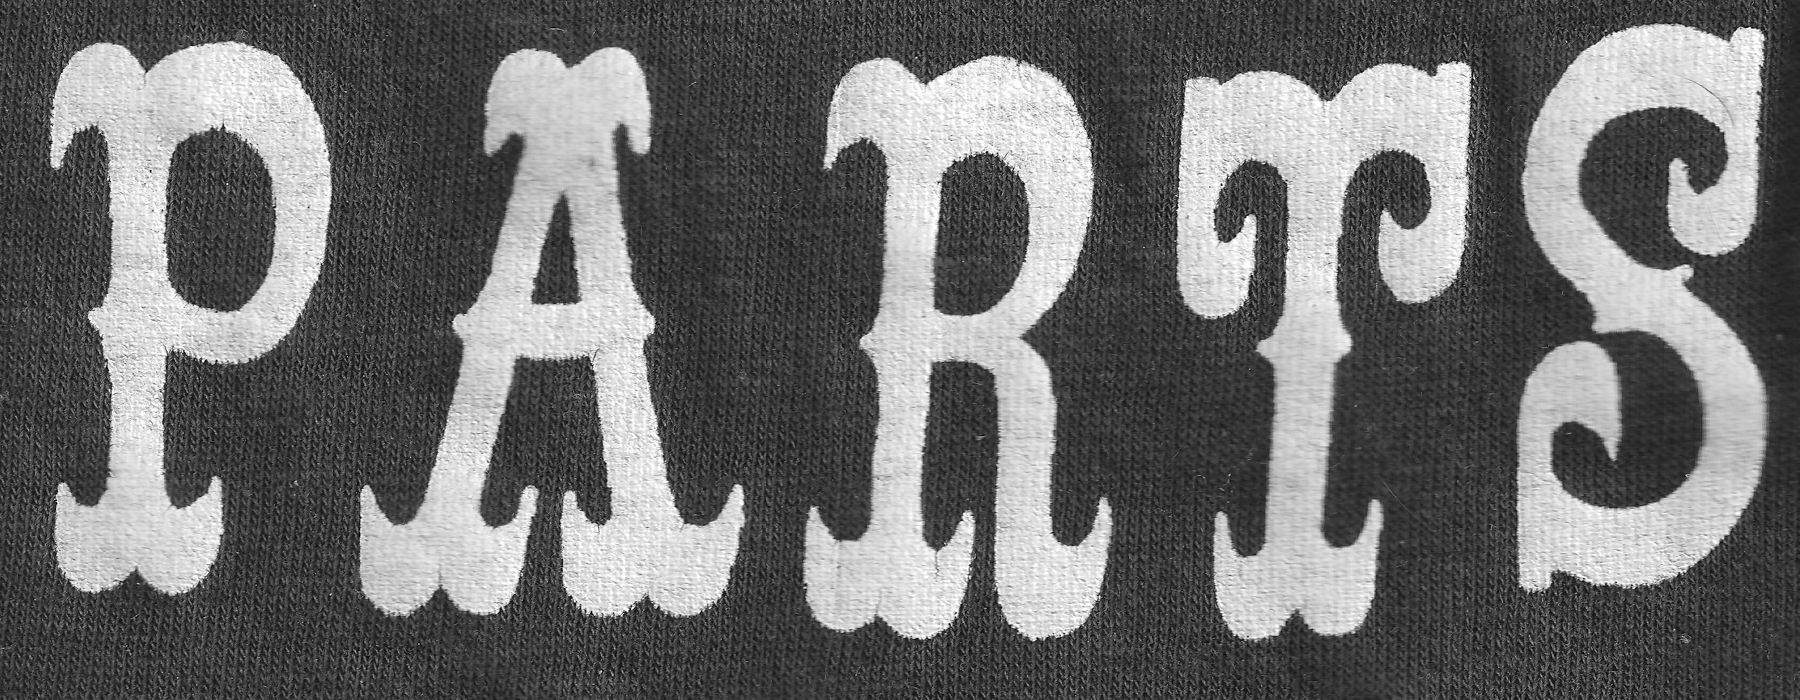 Can someone please help with this font. This is about 30 years old or so